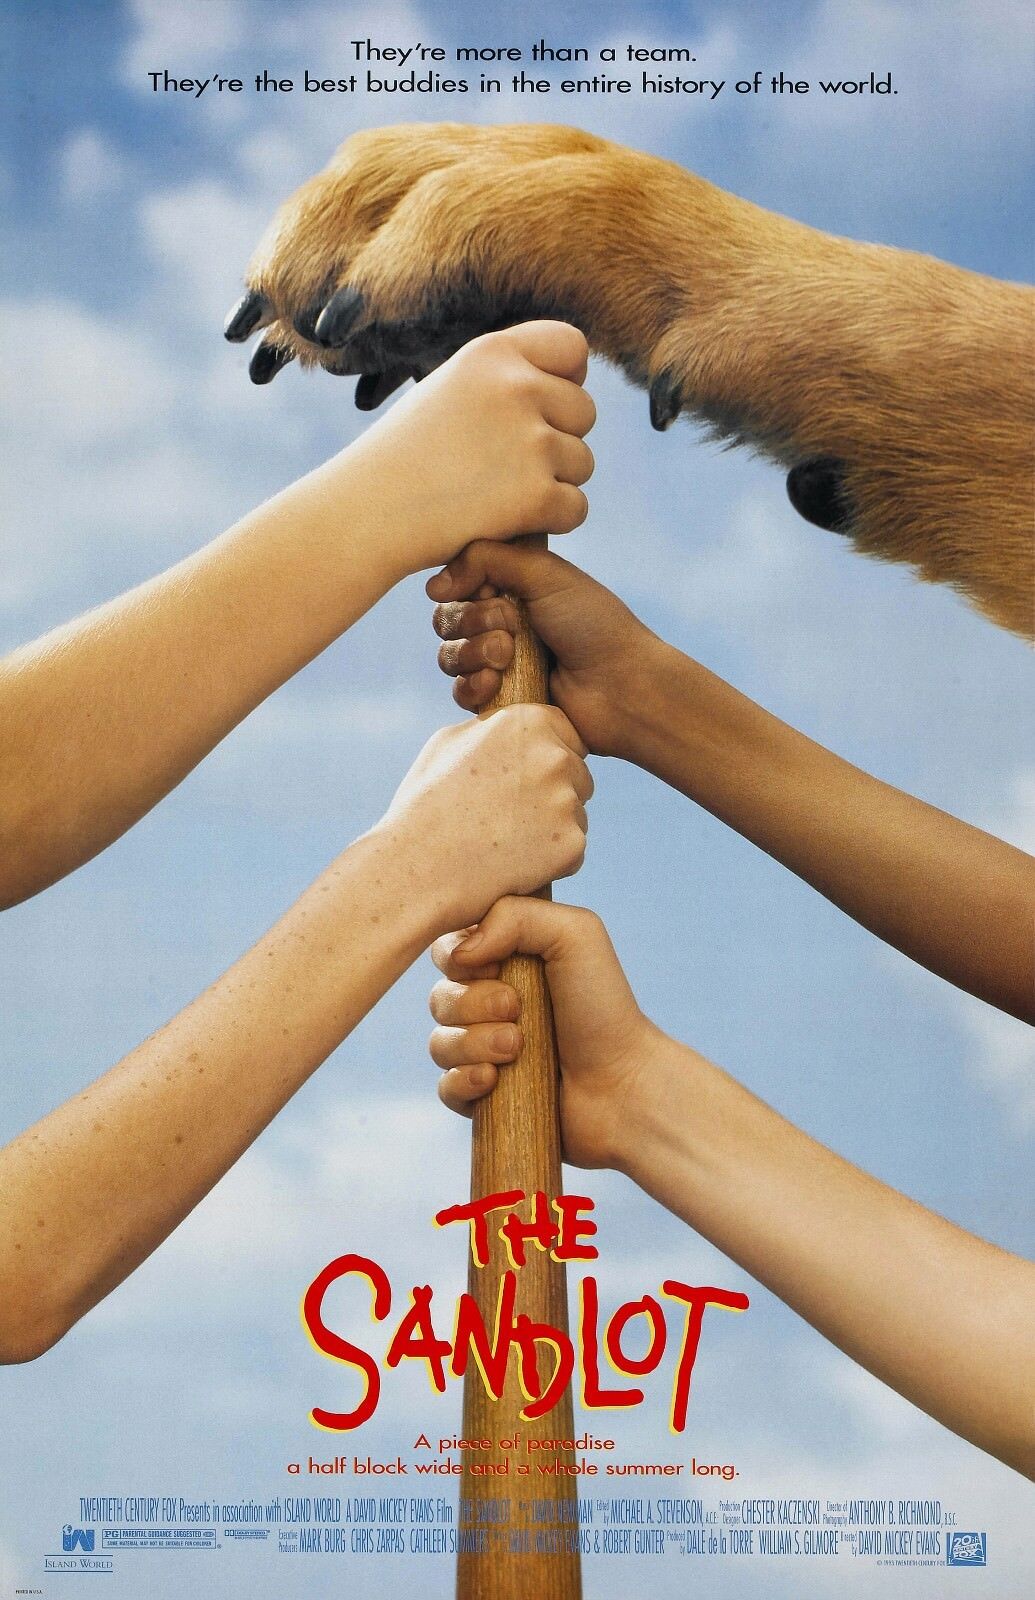 Poster for The Sandlot, featuring boy's hands on a bat with a dogs paw on top